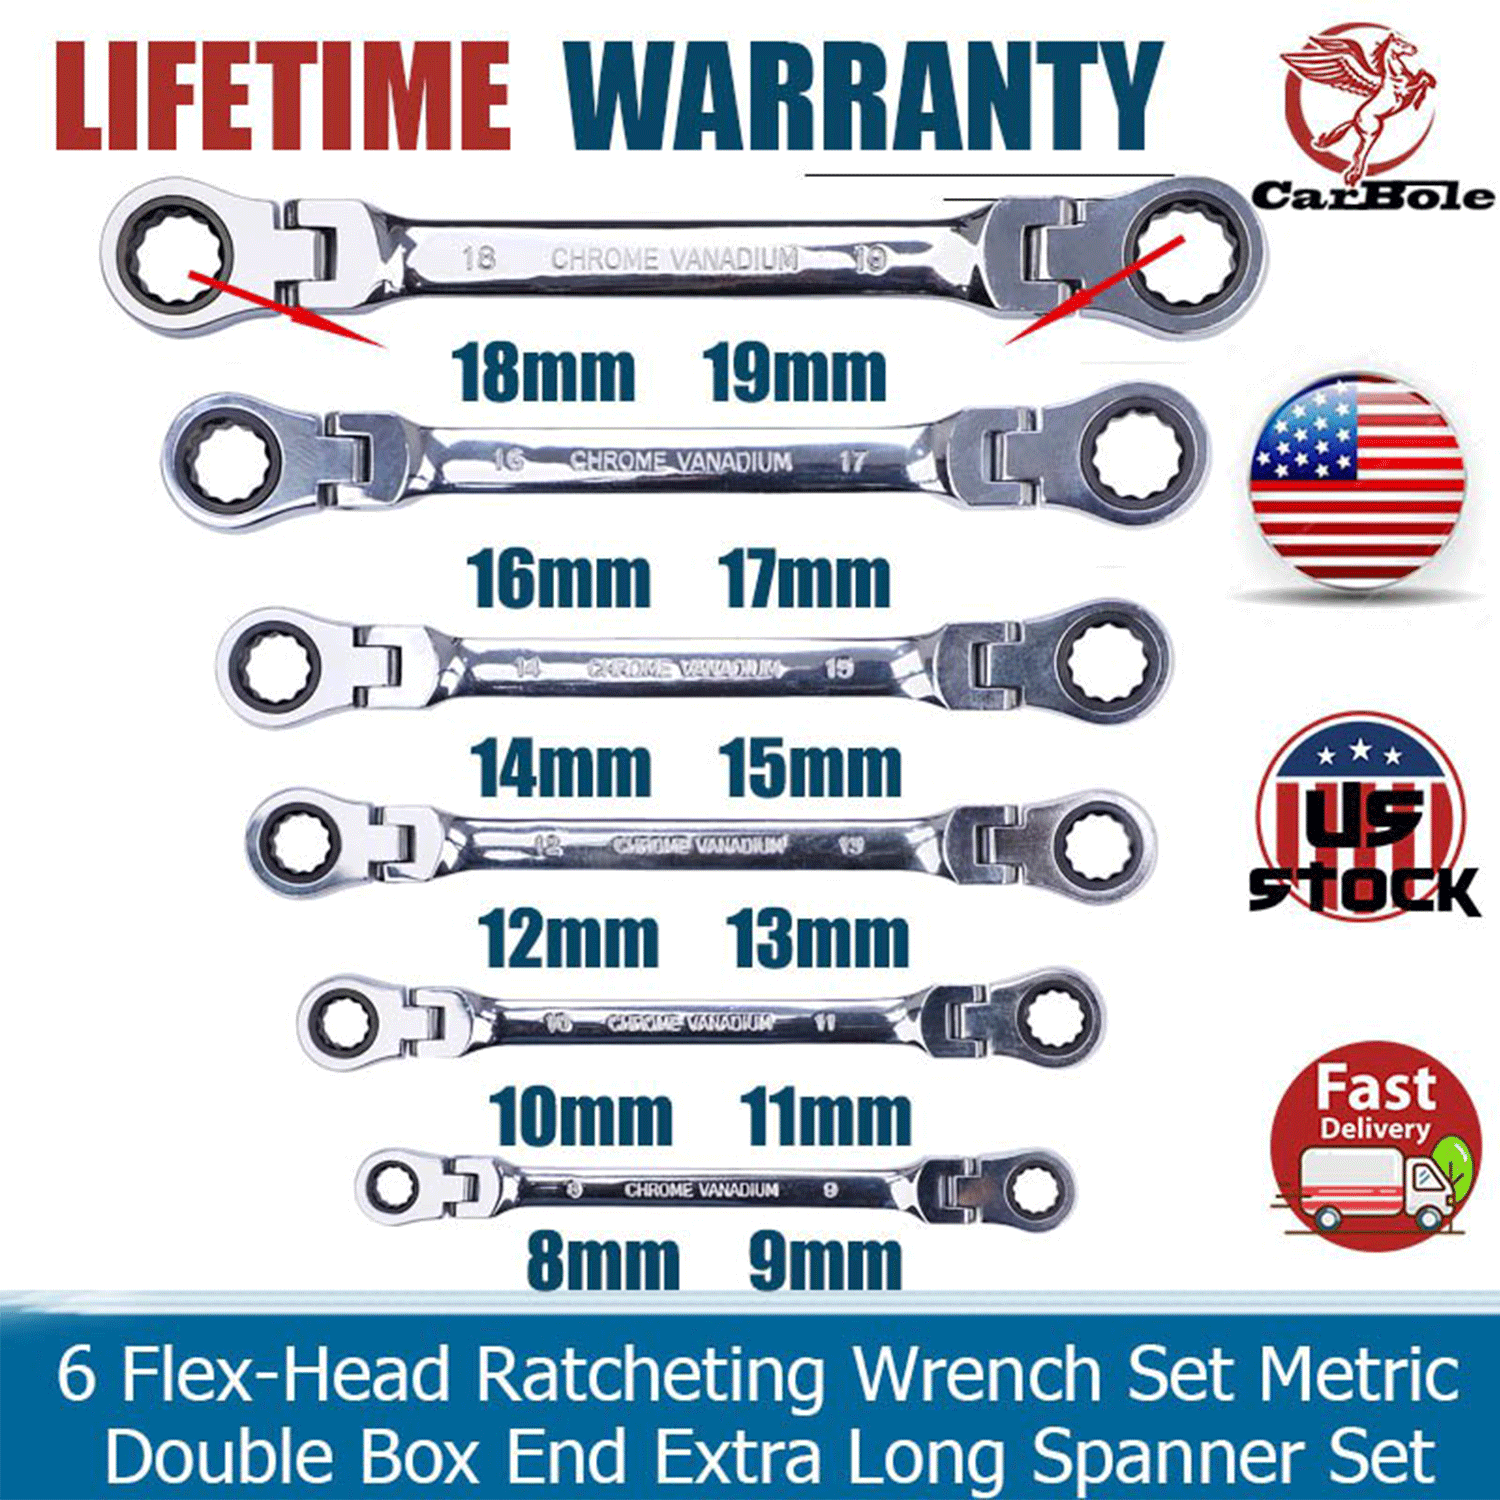 11mm Metric Flex-Head Ratchet Wrench,Box End Head 72-Tooth Ratcheting Combination Wrench Spanner 